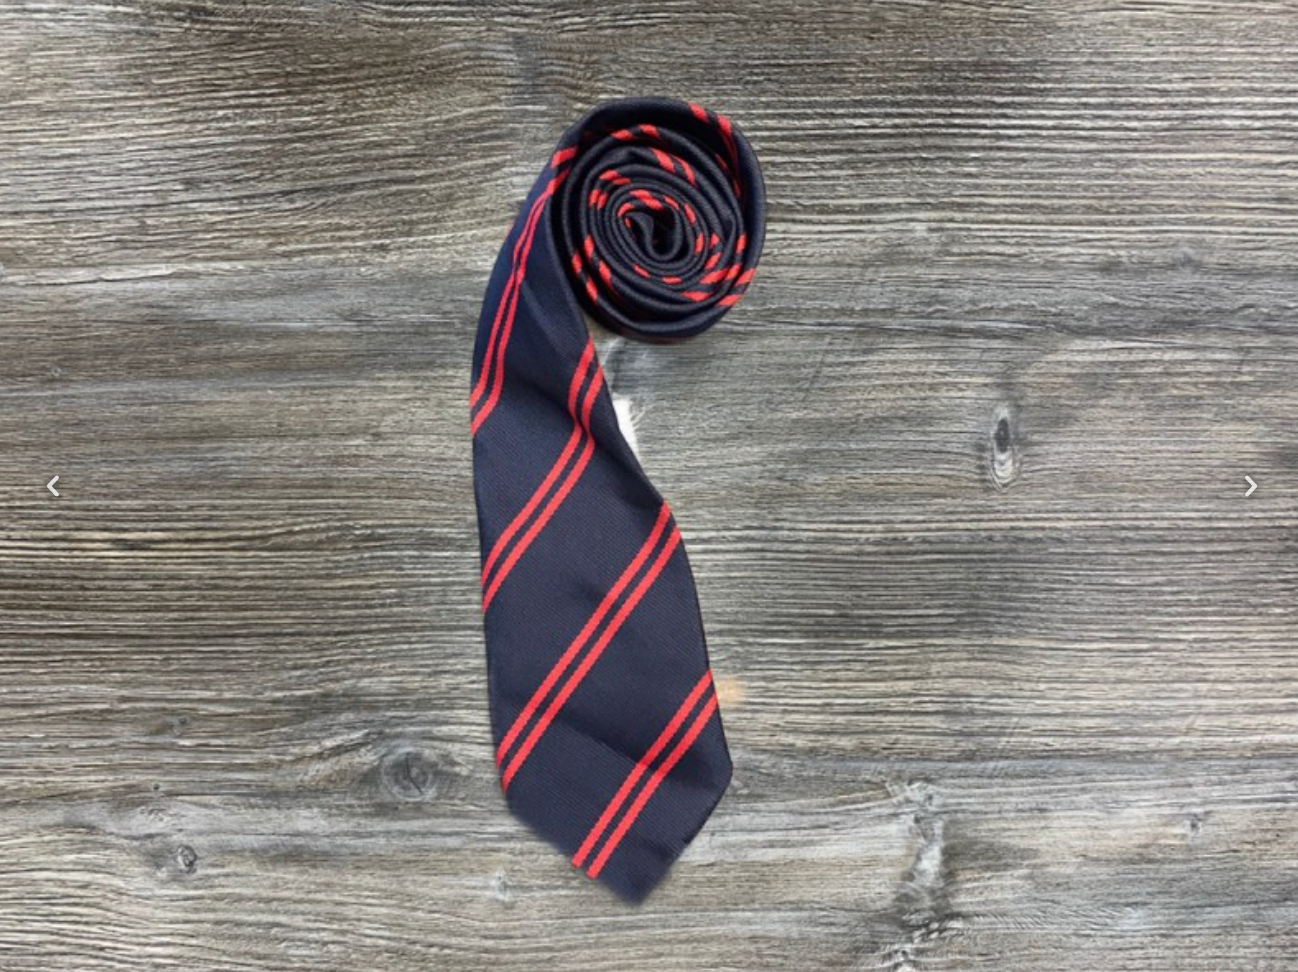 Barrow URC Primary School Navy with red striped tie